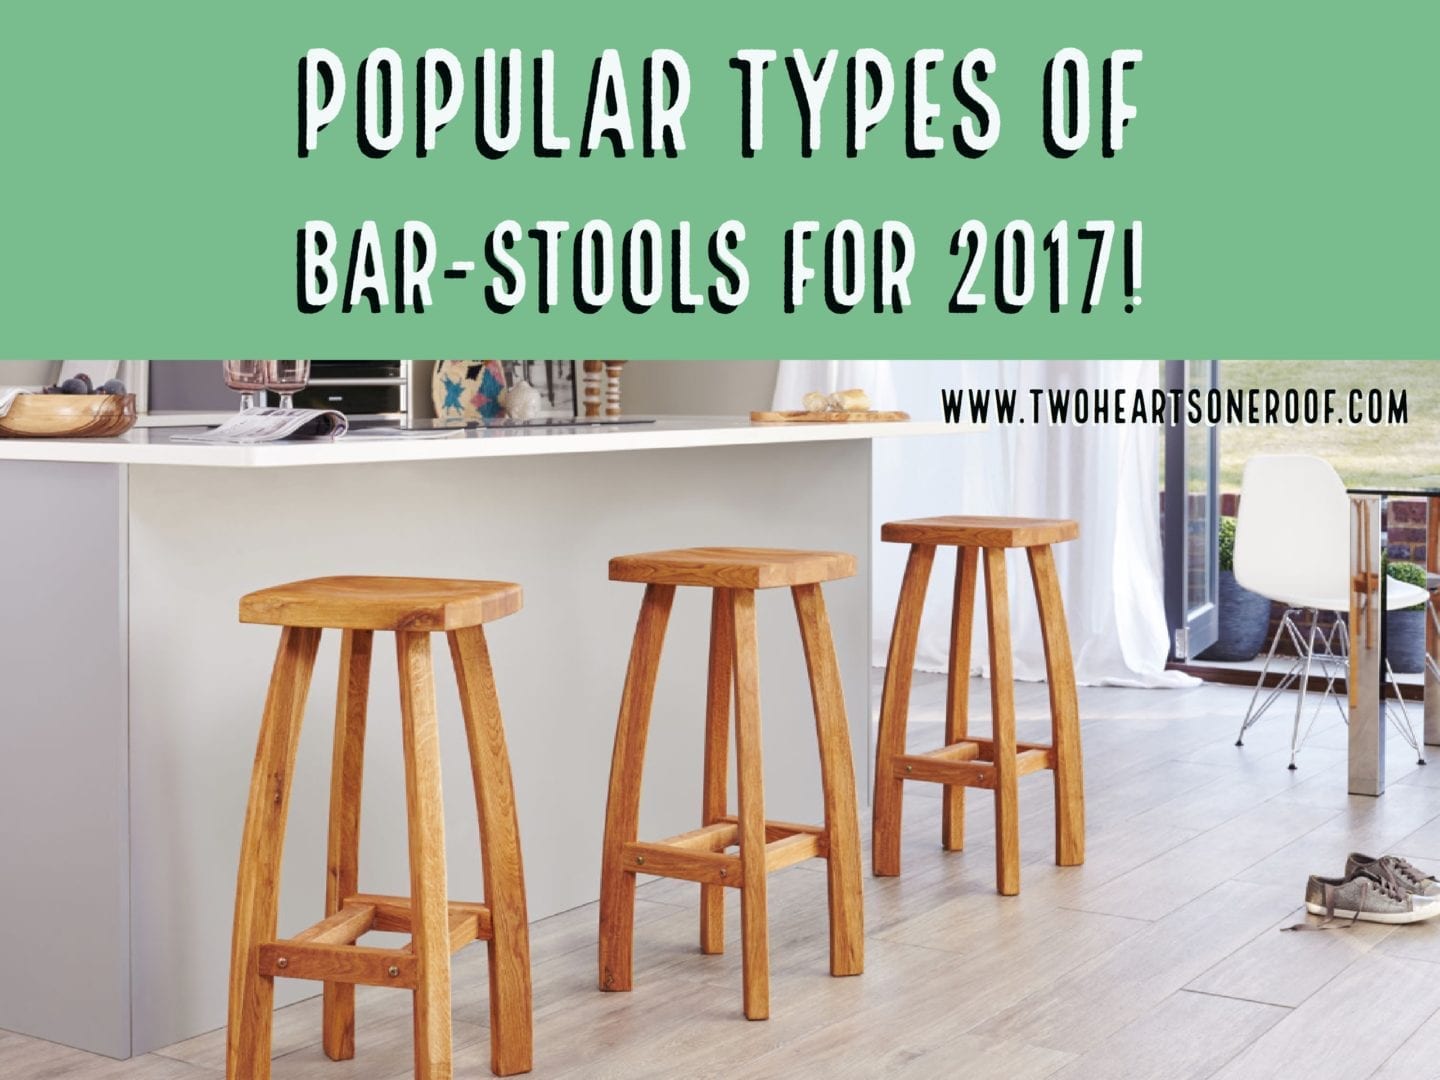 The Best 4 Types Of Bar Stools That Are Popular In 2017